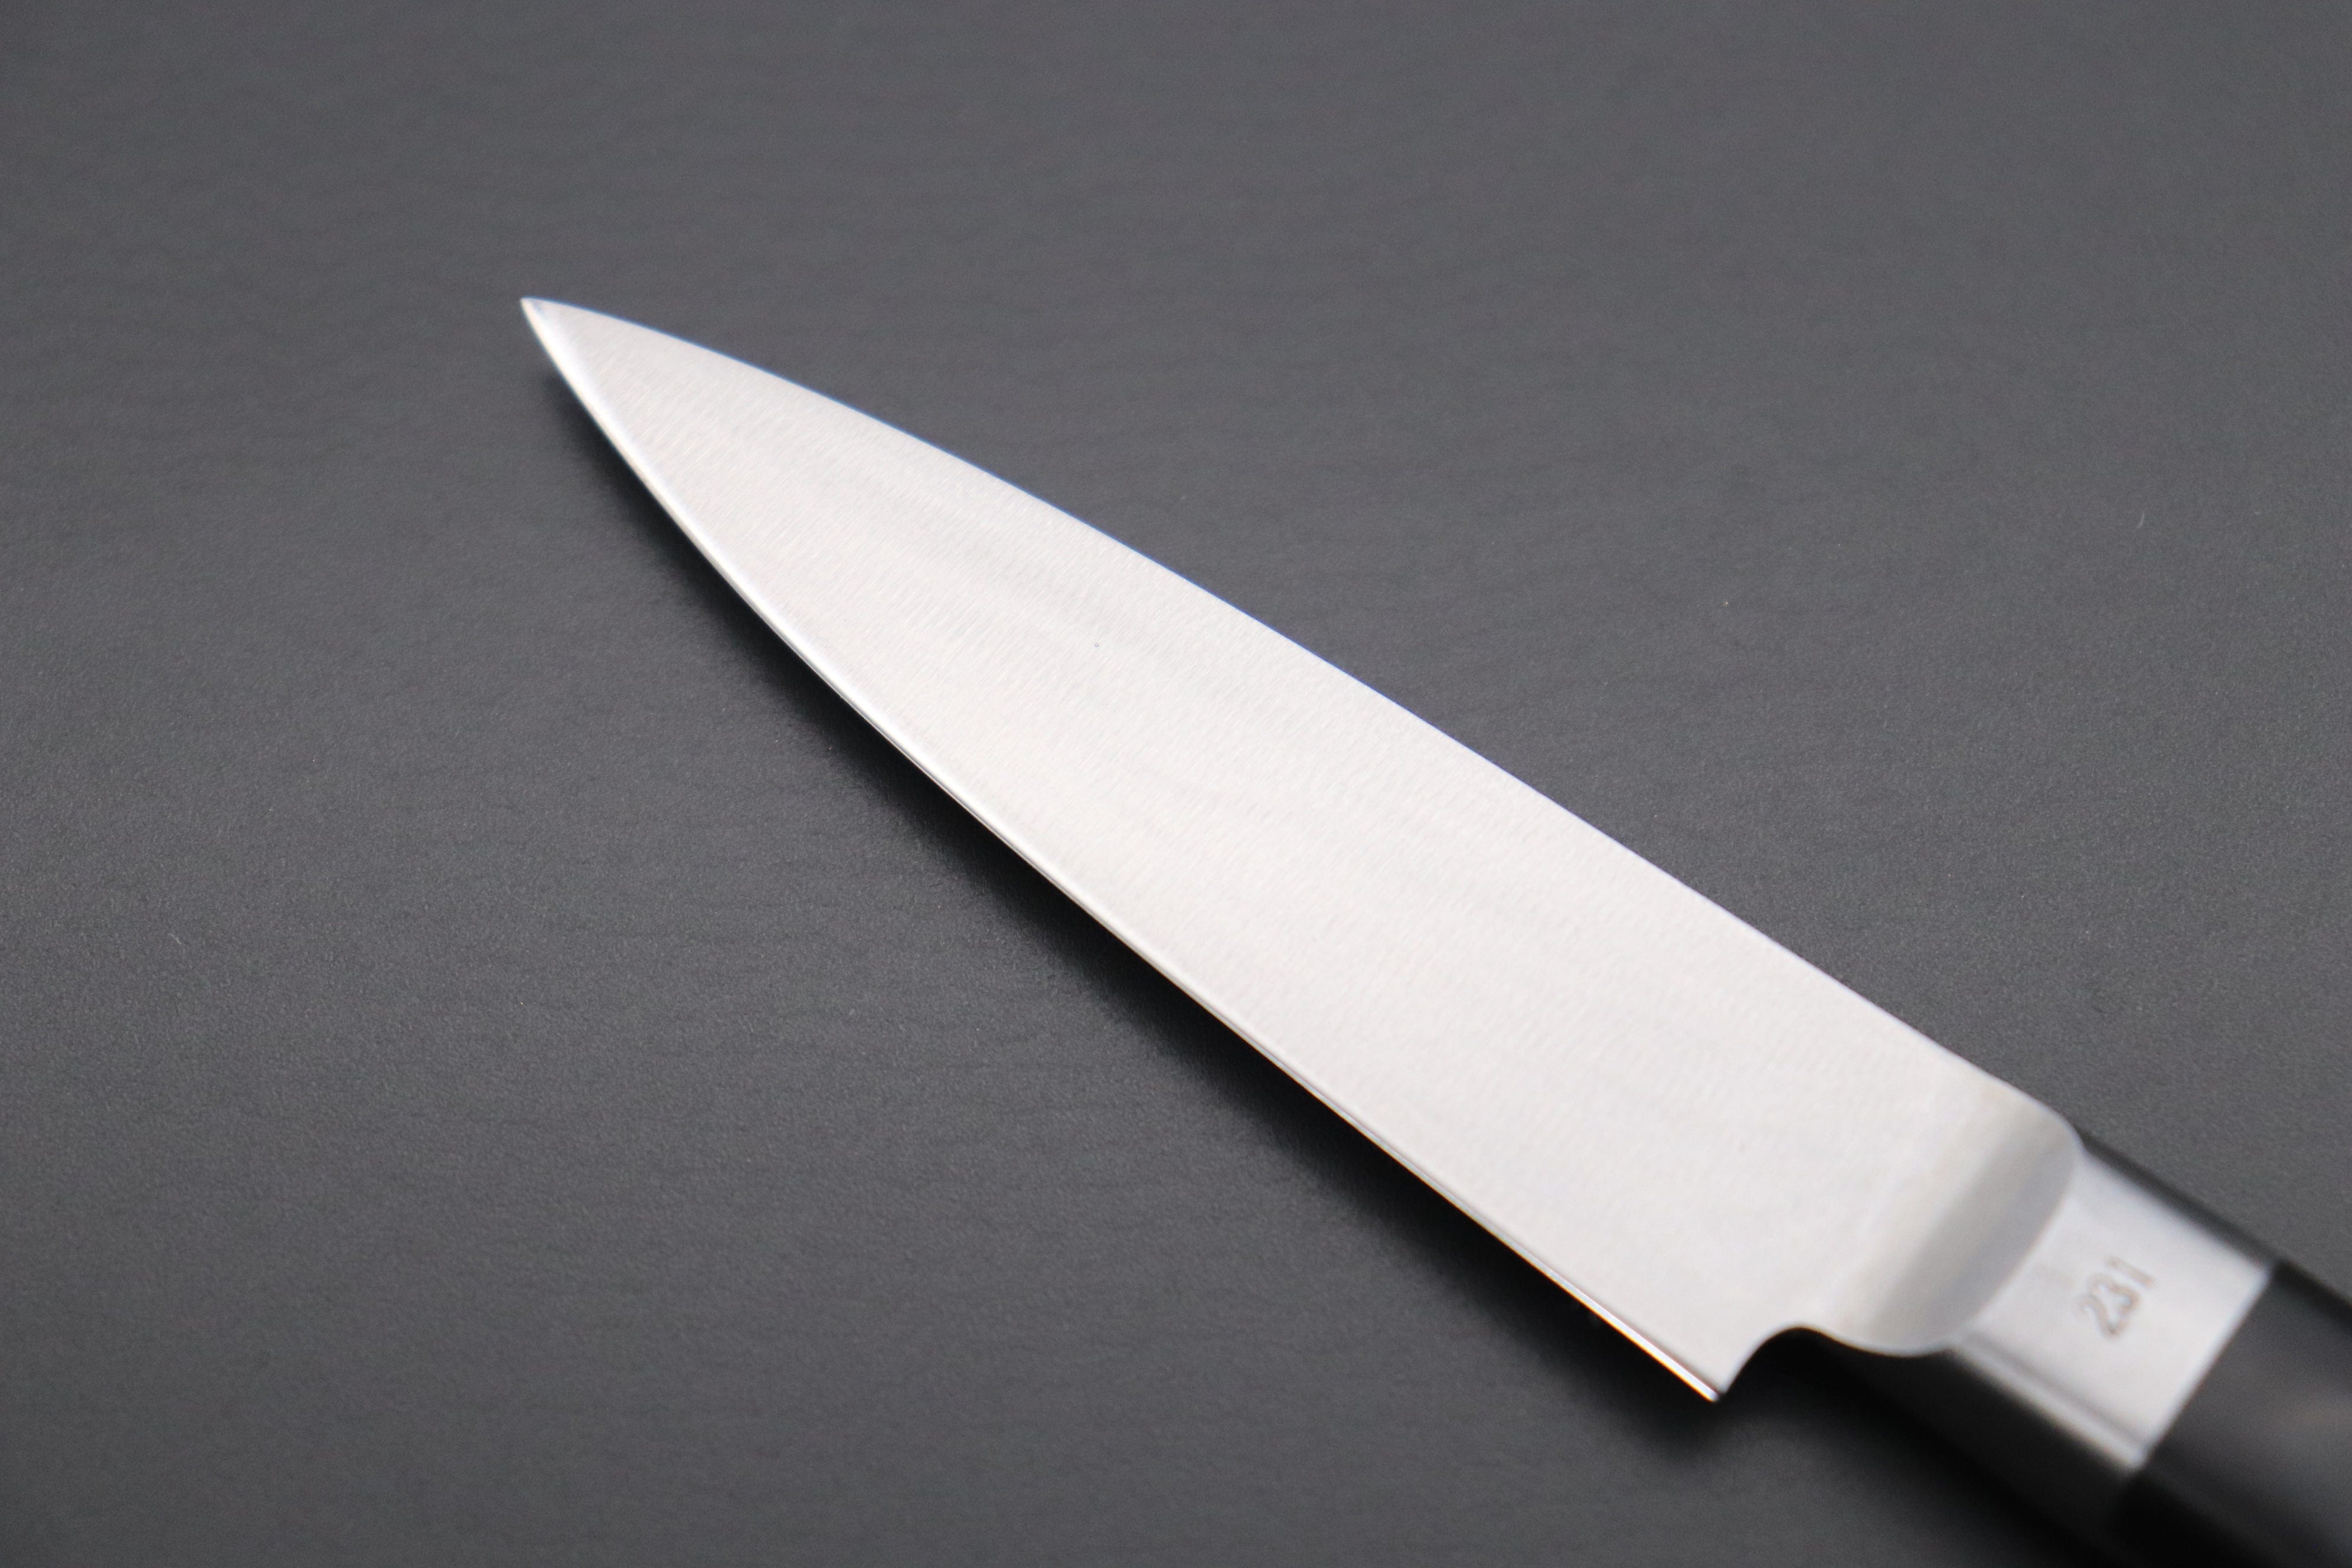 The Best Paring Knife You've Ever Owned - Blue Brigade-Style